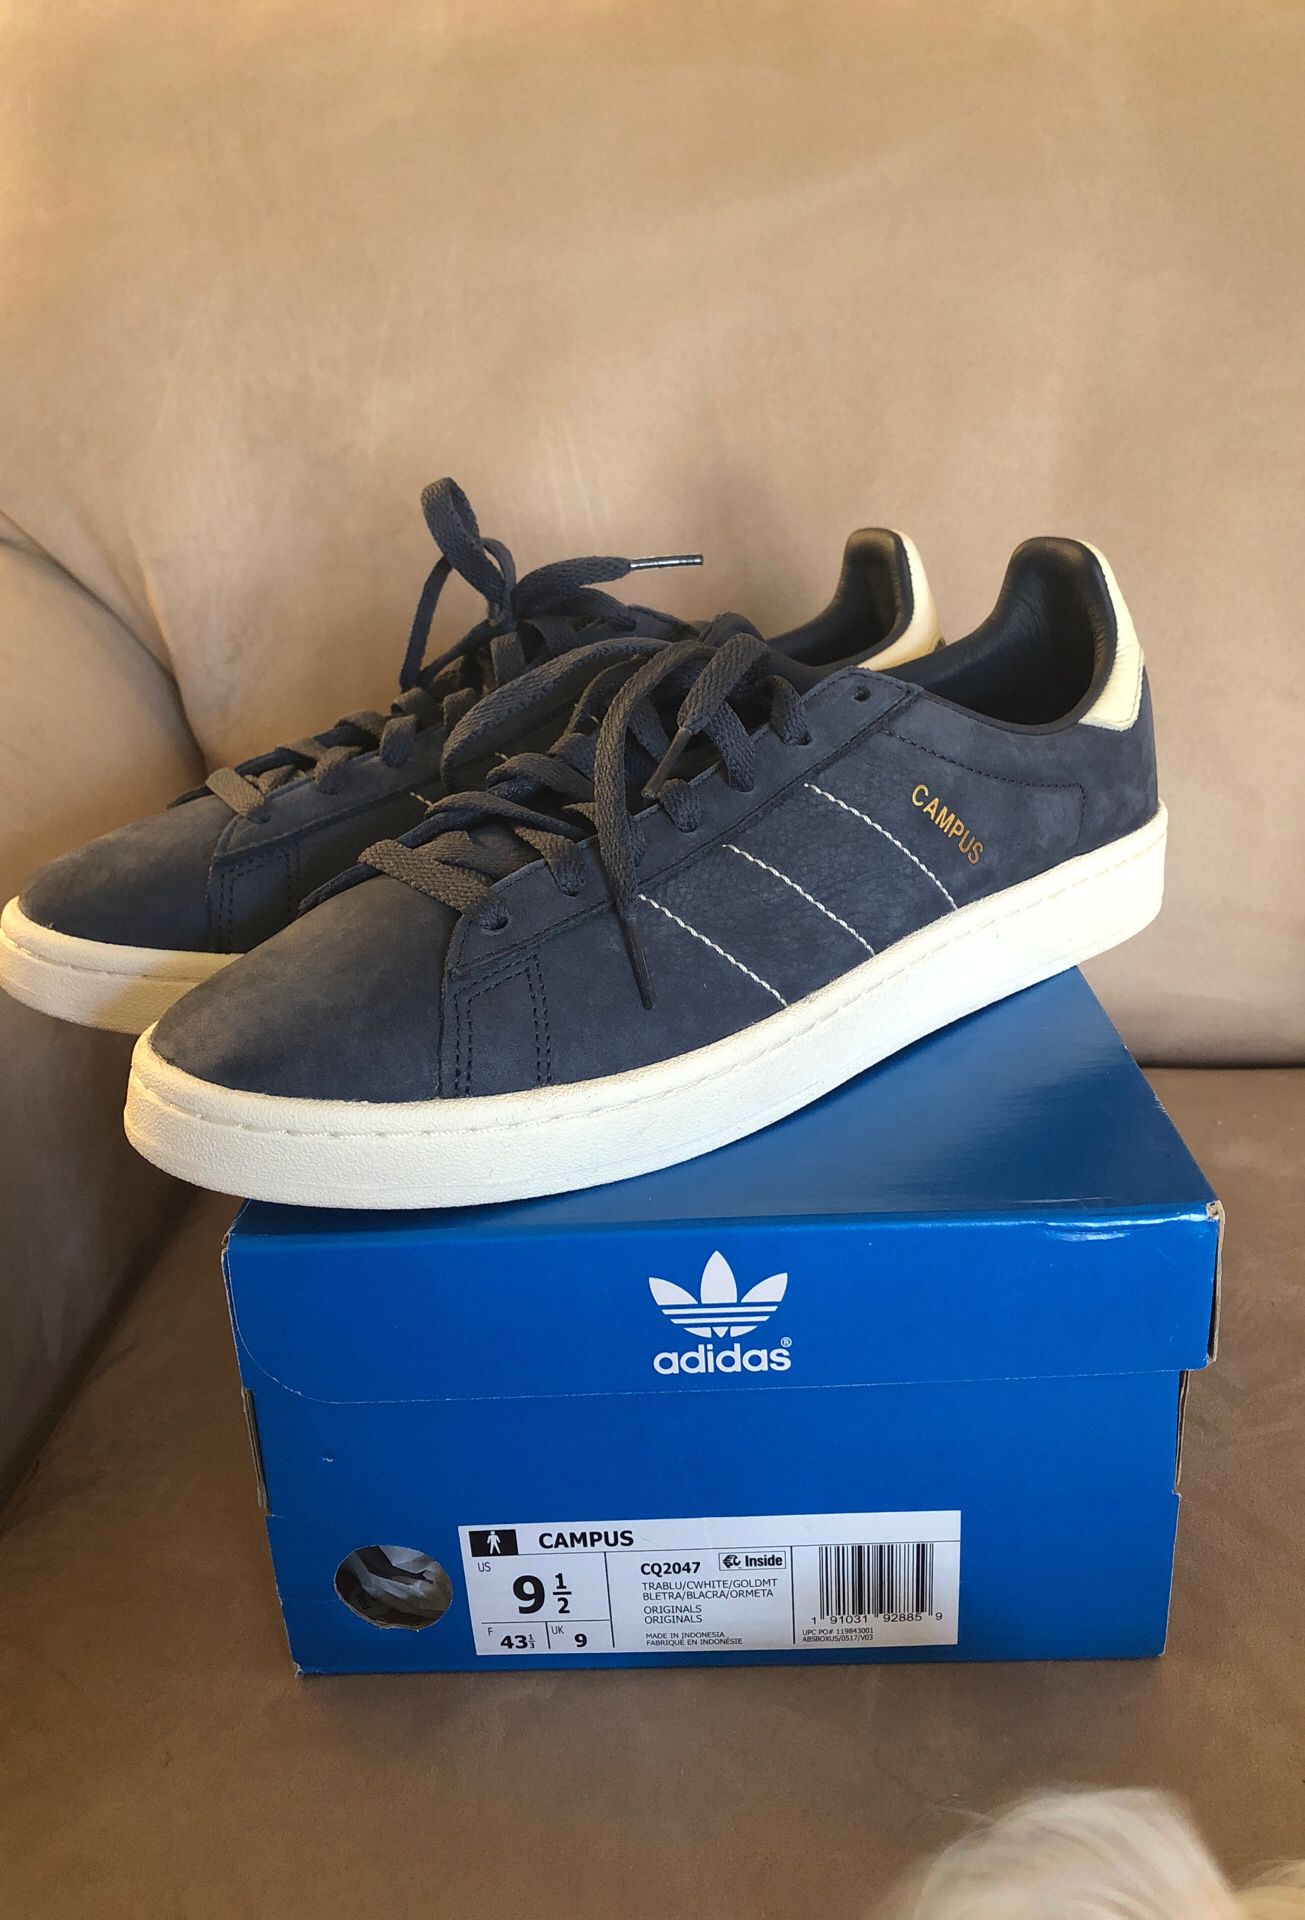 Adidas Campus “Handcrafted Pack” Size 9.5 (CQ2047)